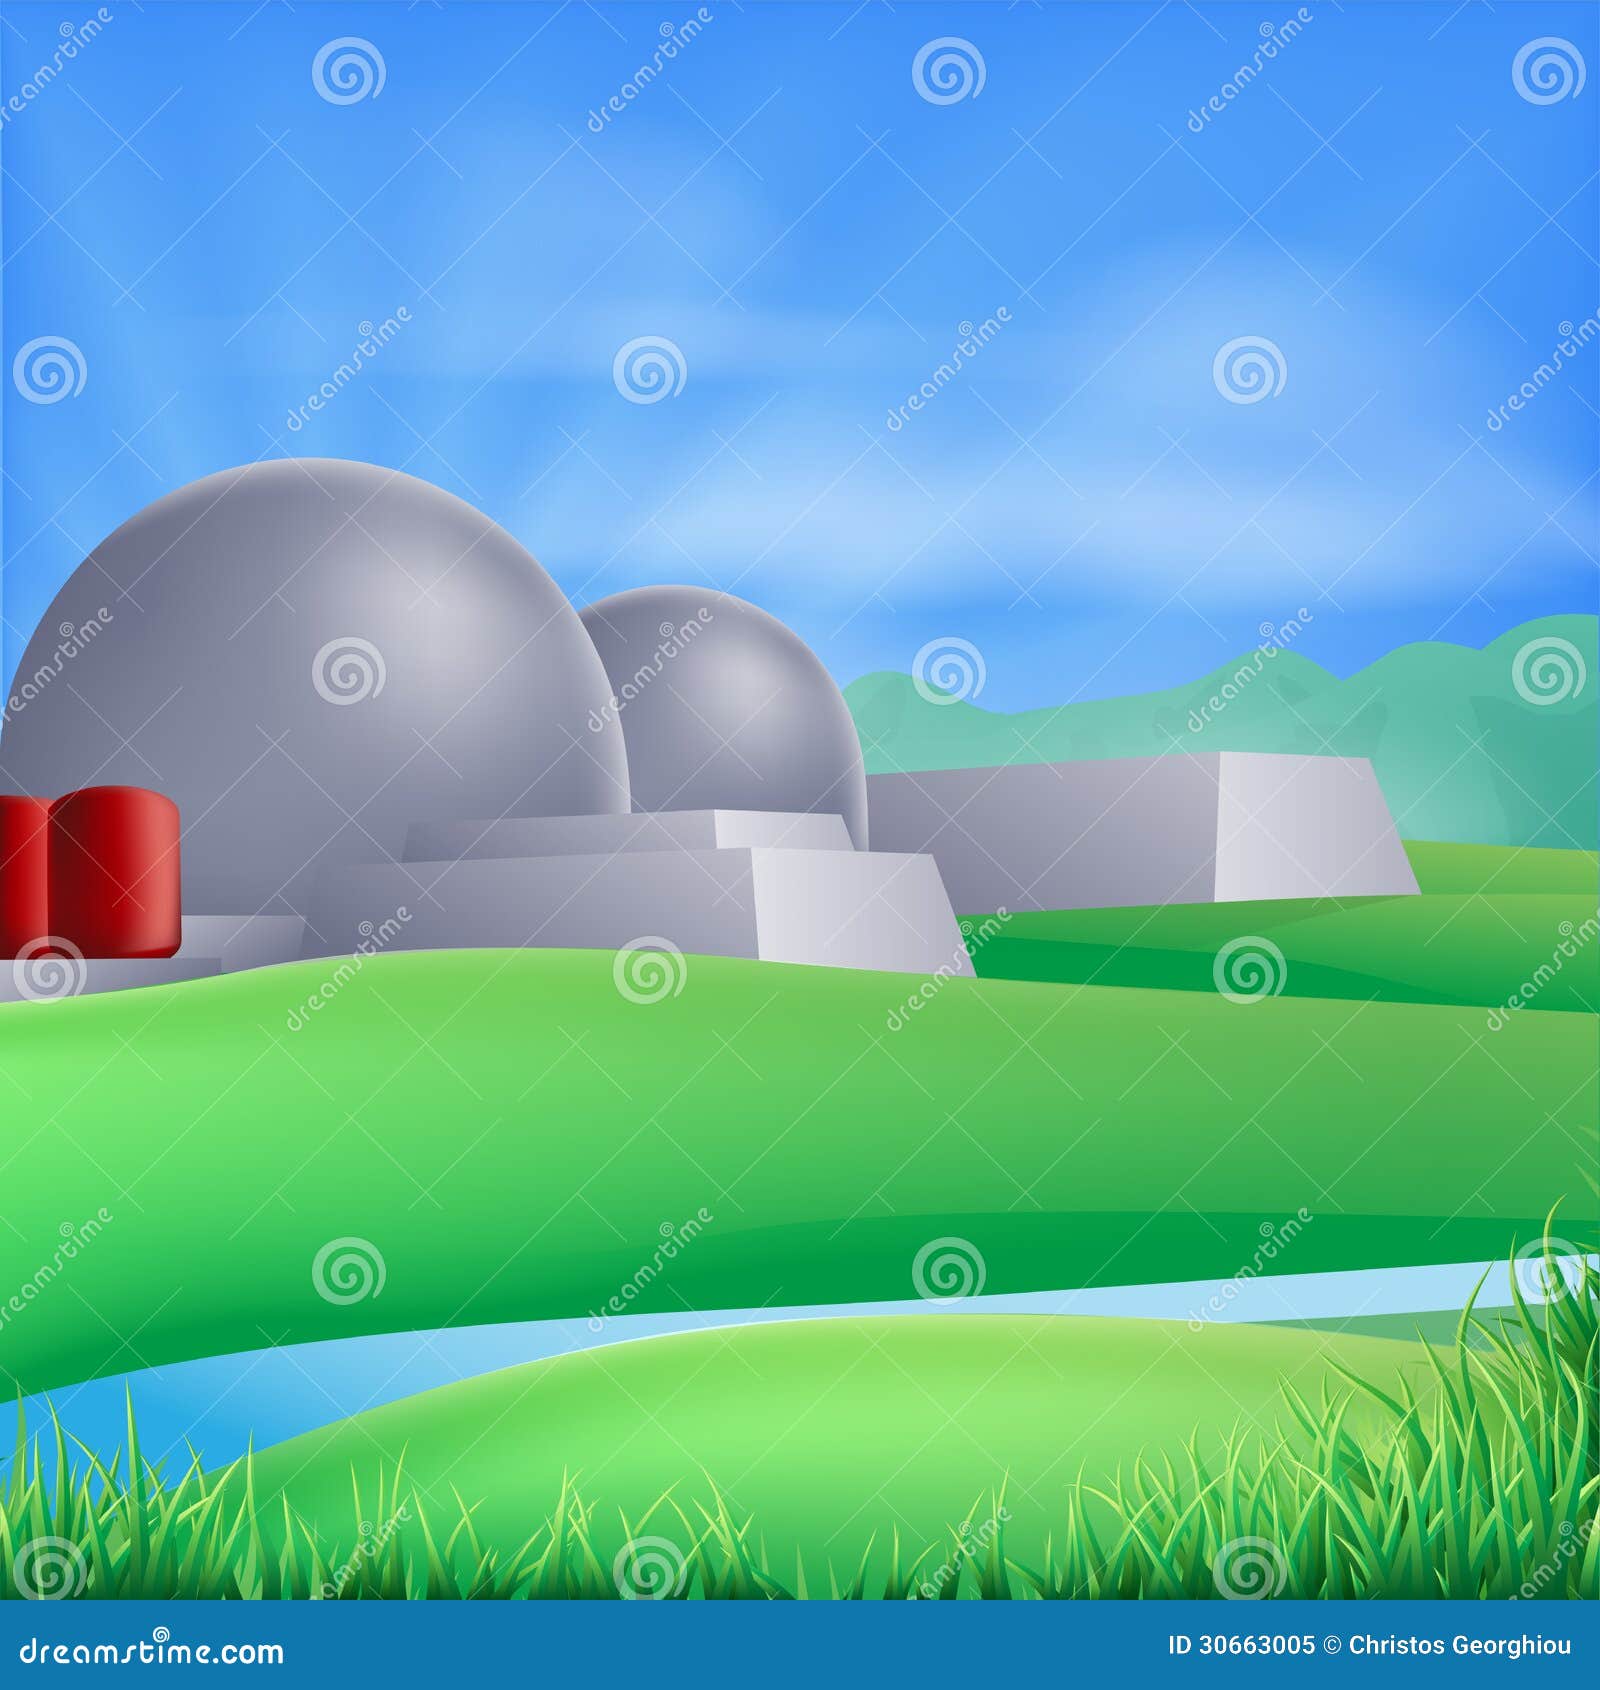 clipart of nuclear power plant - photo #50